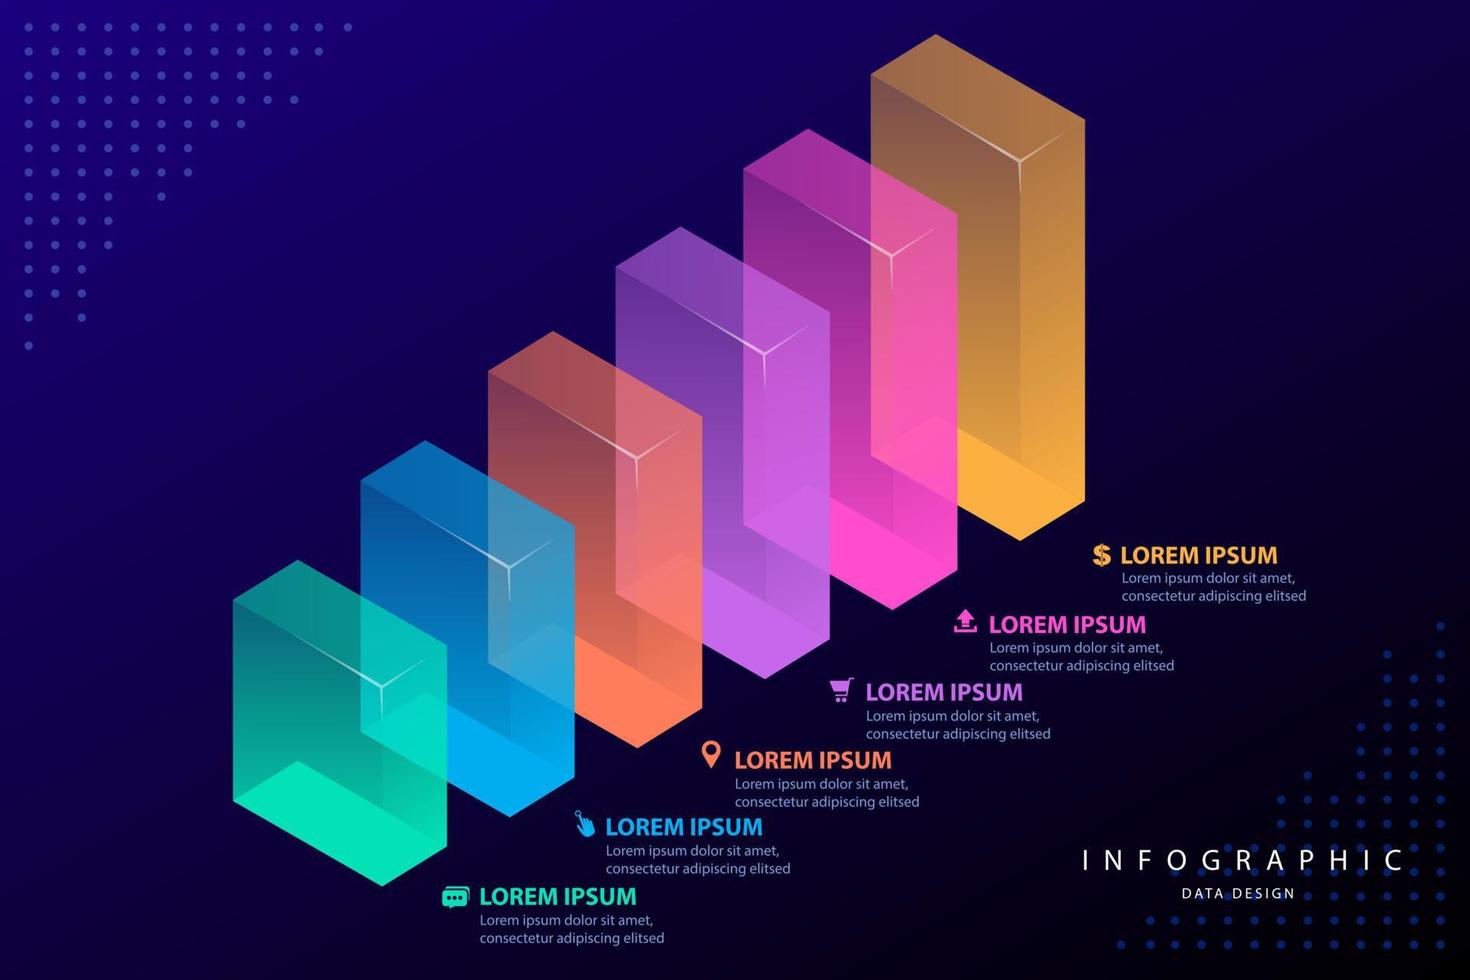 Infographic elements data visualization vector design template. Business concept, glowing gradient 3d chart, graph, illustration.